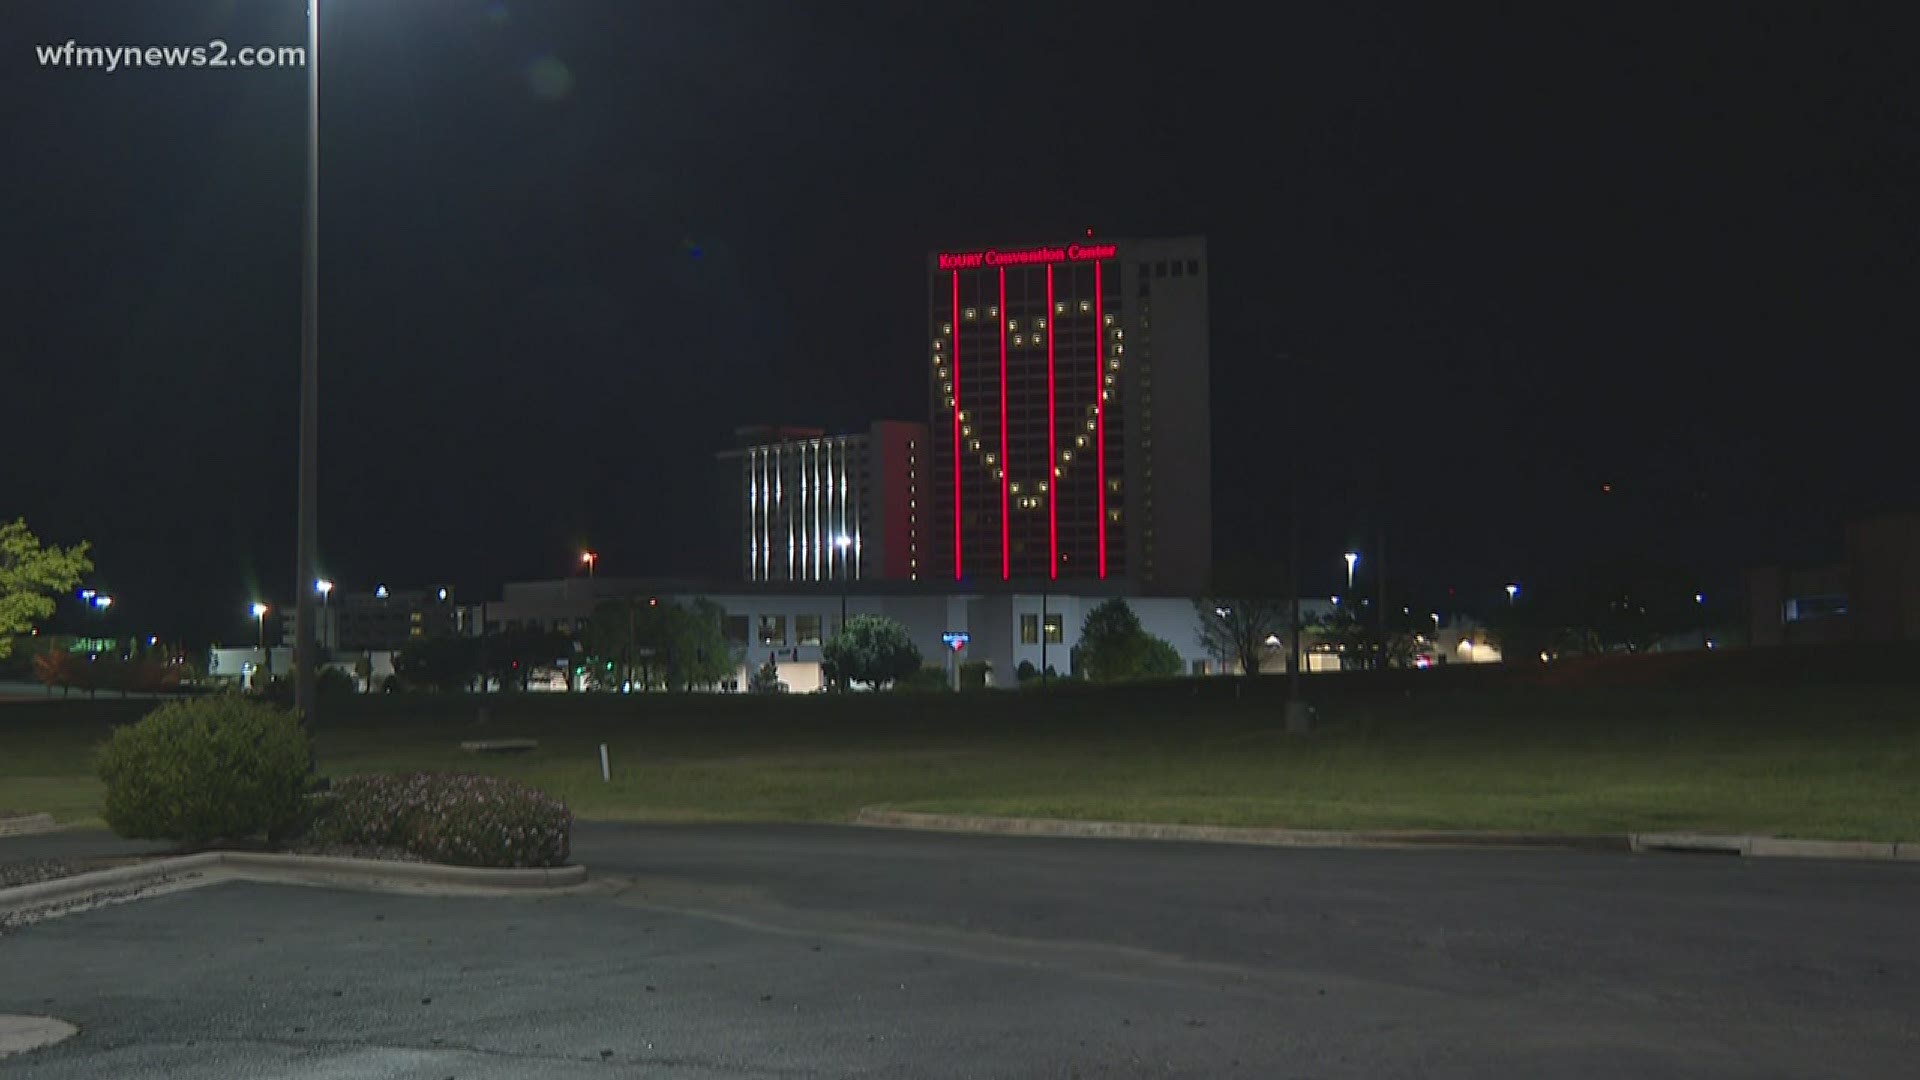 The Koury Convention Center shines a hopeful message to folks driving along I-40.